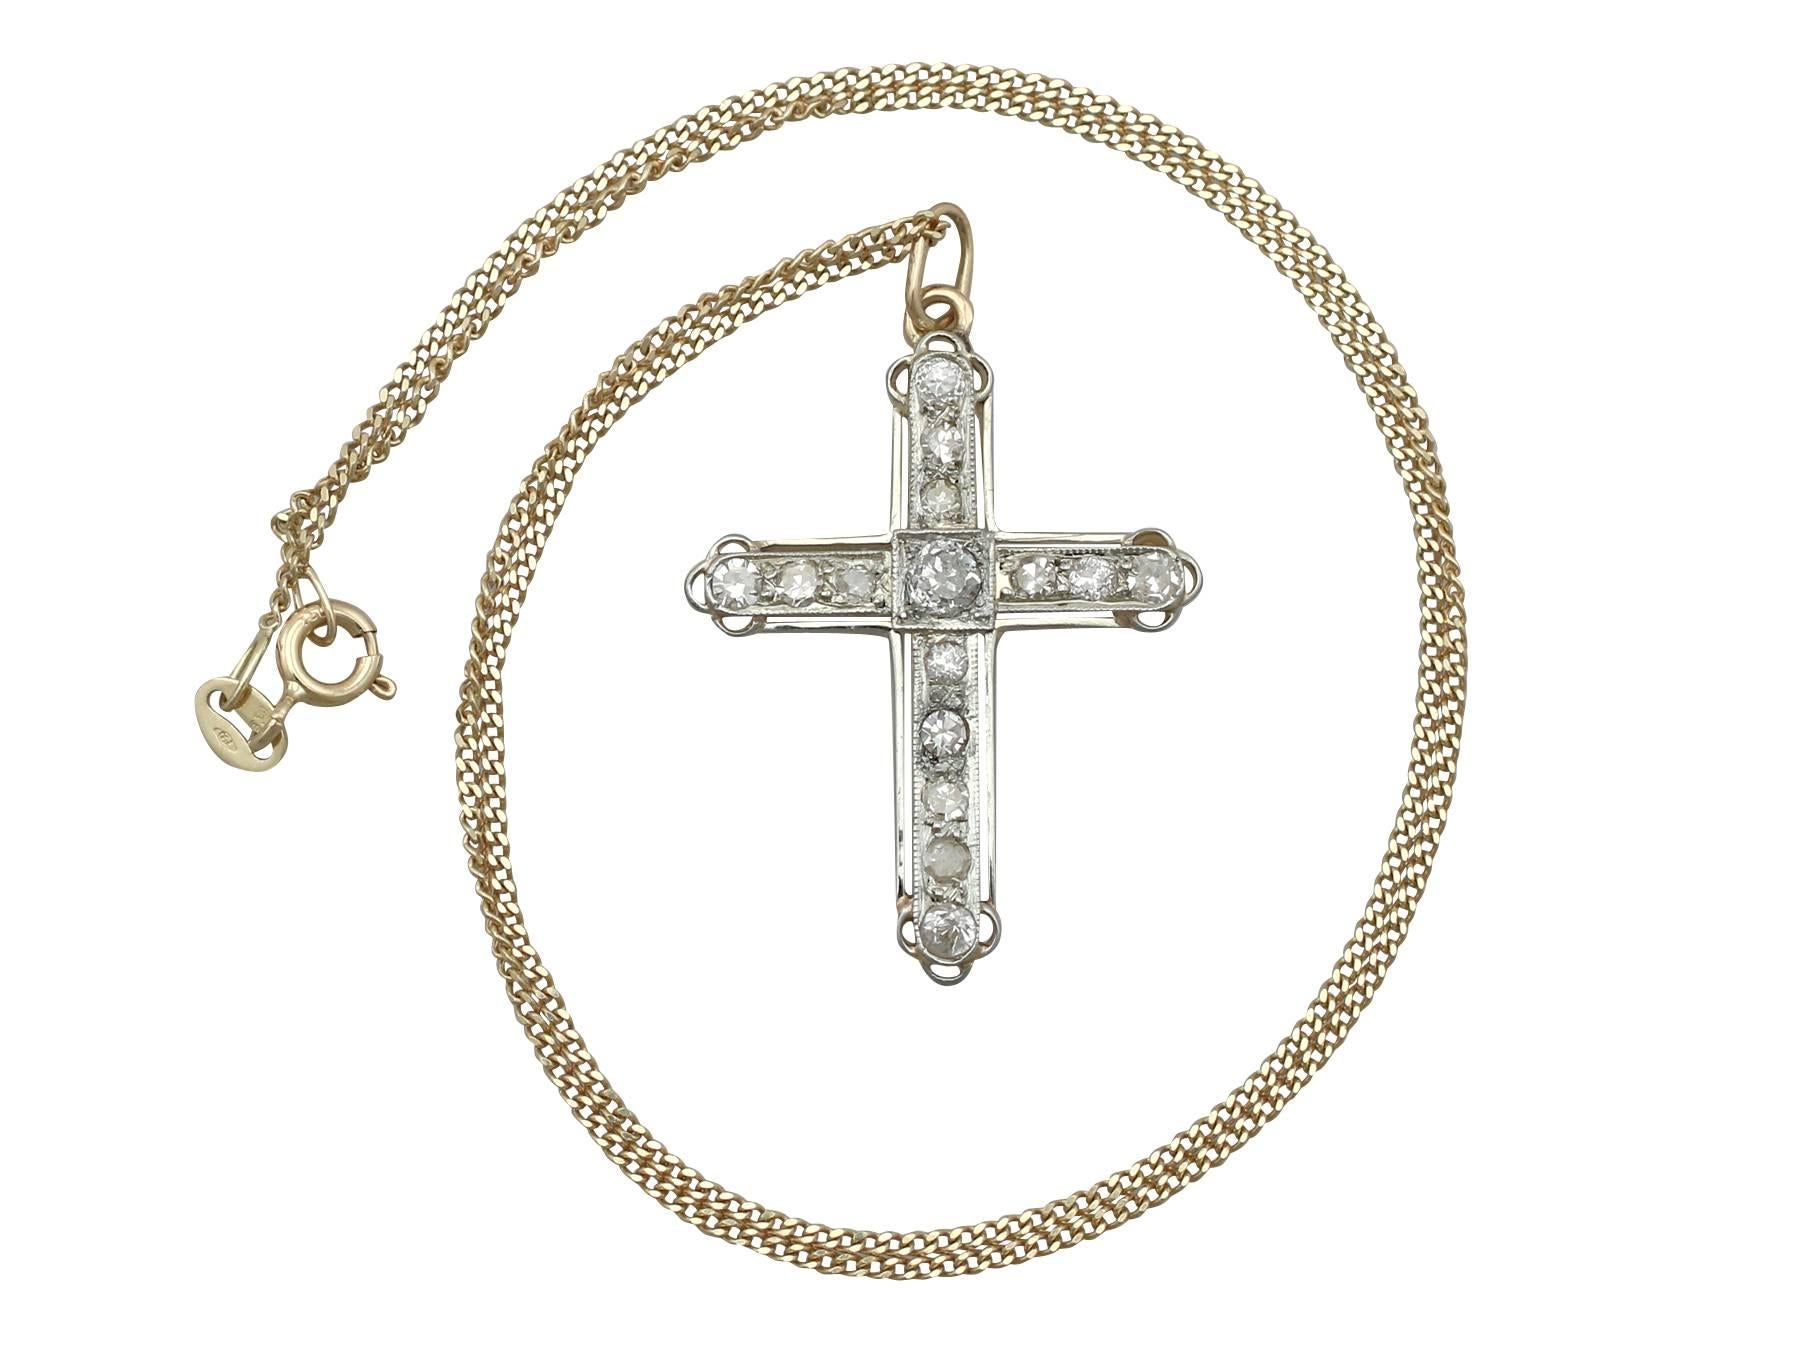 This impressive 0.91 carat diamond and 18 karat yellow gold, 18 karat white gold set 'cross' pendant; part of our diverse vintage jewelry and estate jewelry collections

This fine and impressive vintage diamond cross pendant has been crafted in 18 k